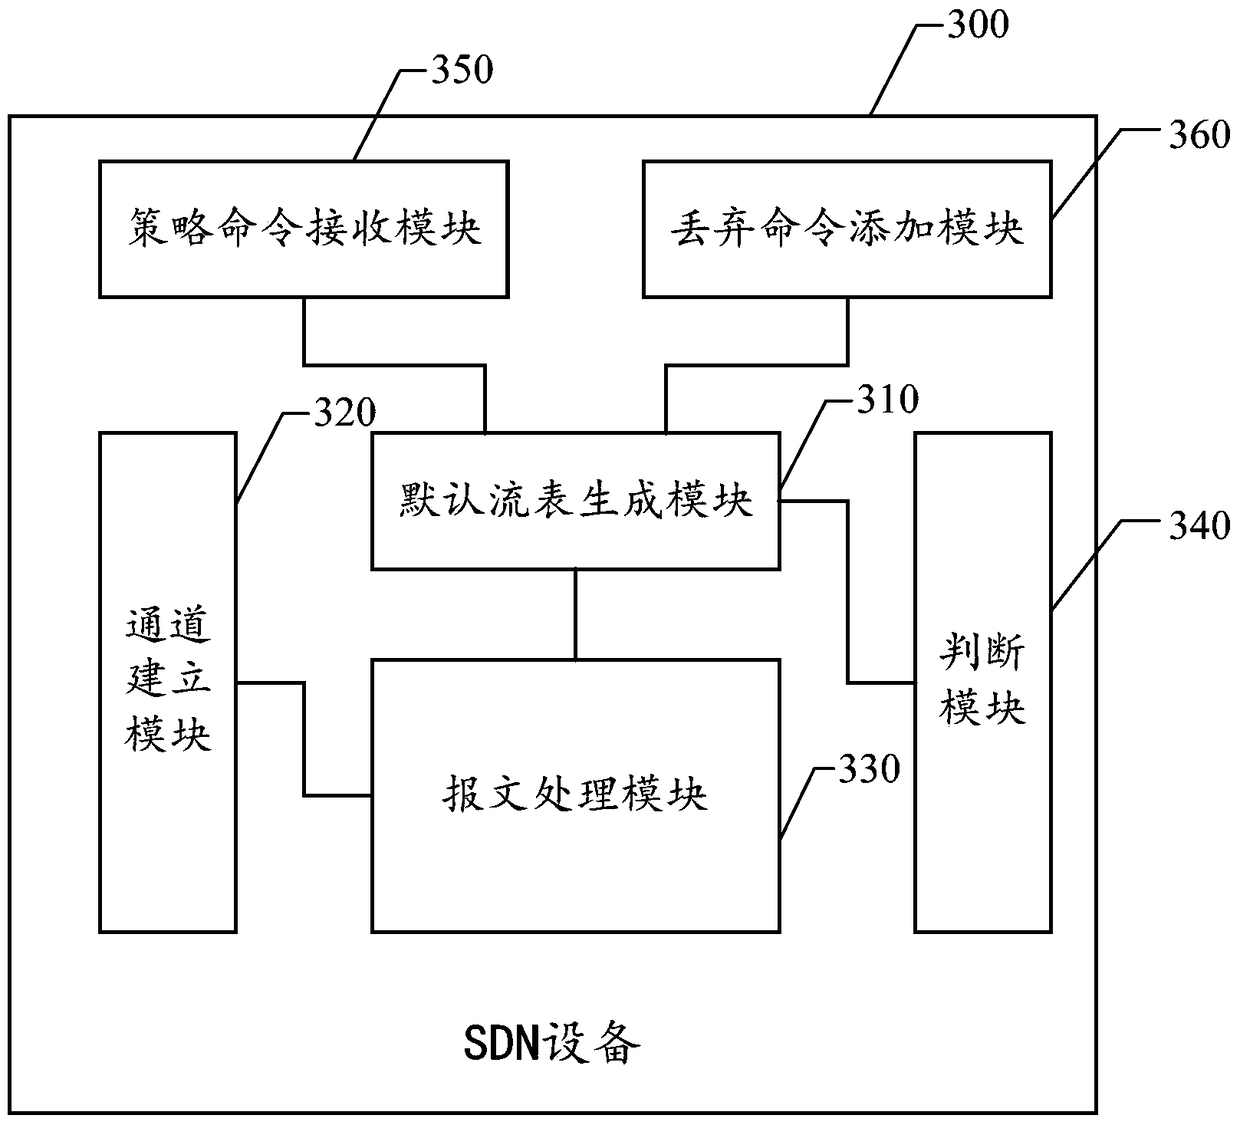 A user policy-based SDN message processing method, system and SDN device